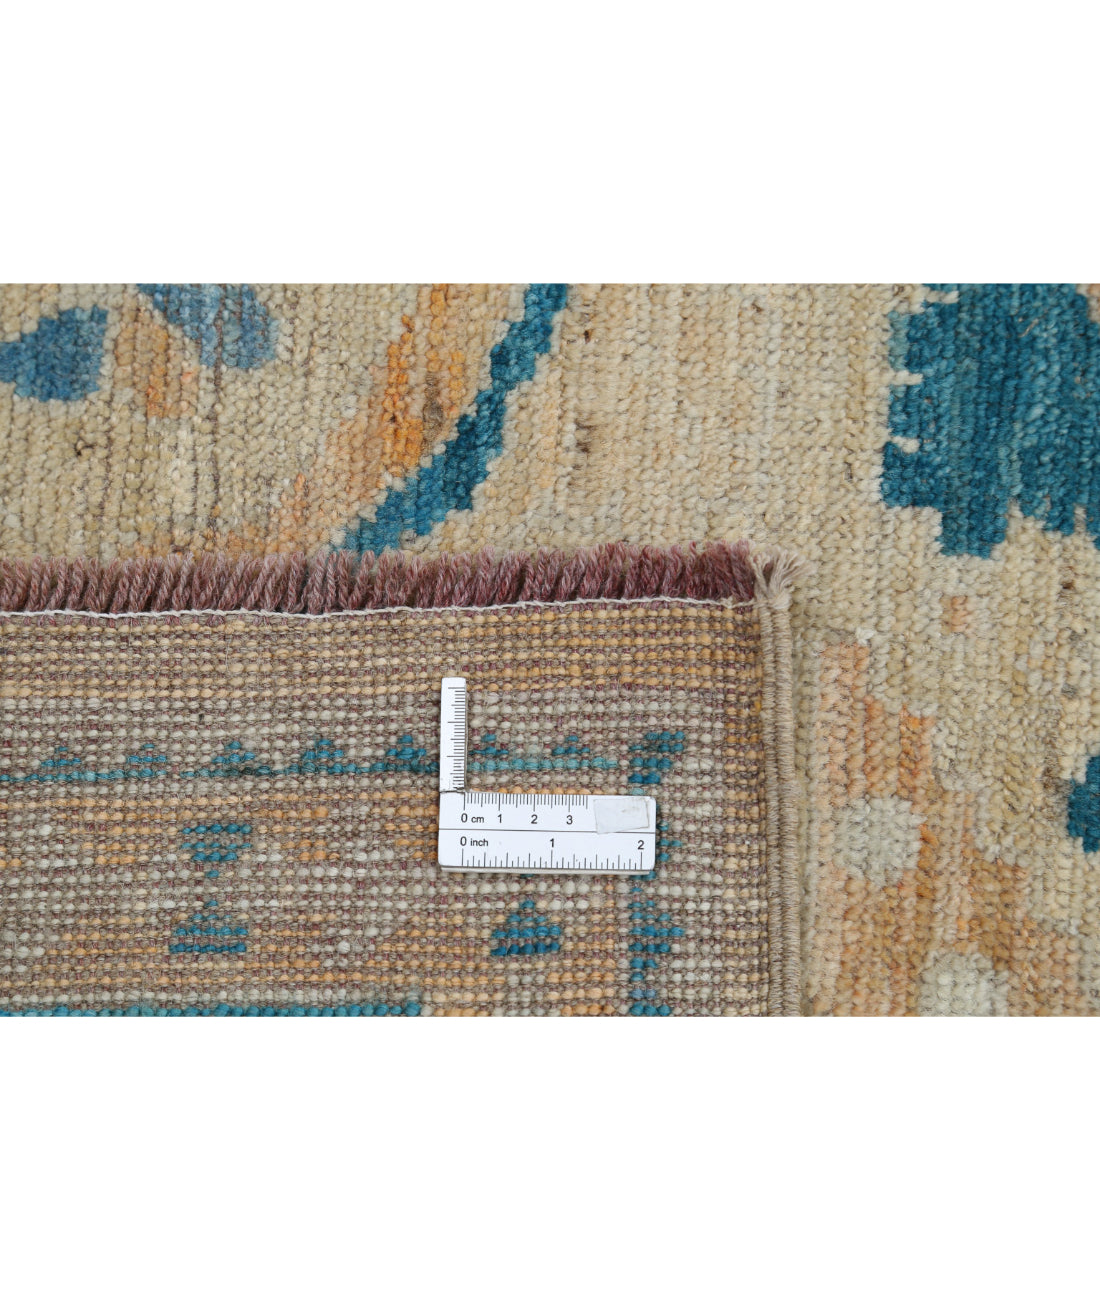 Hand Knotted Oushak Wool Rug - 8'9'' x 11'7'' 8'9'' x 11'7'' (263 X 348) / Beige / Blue